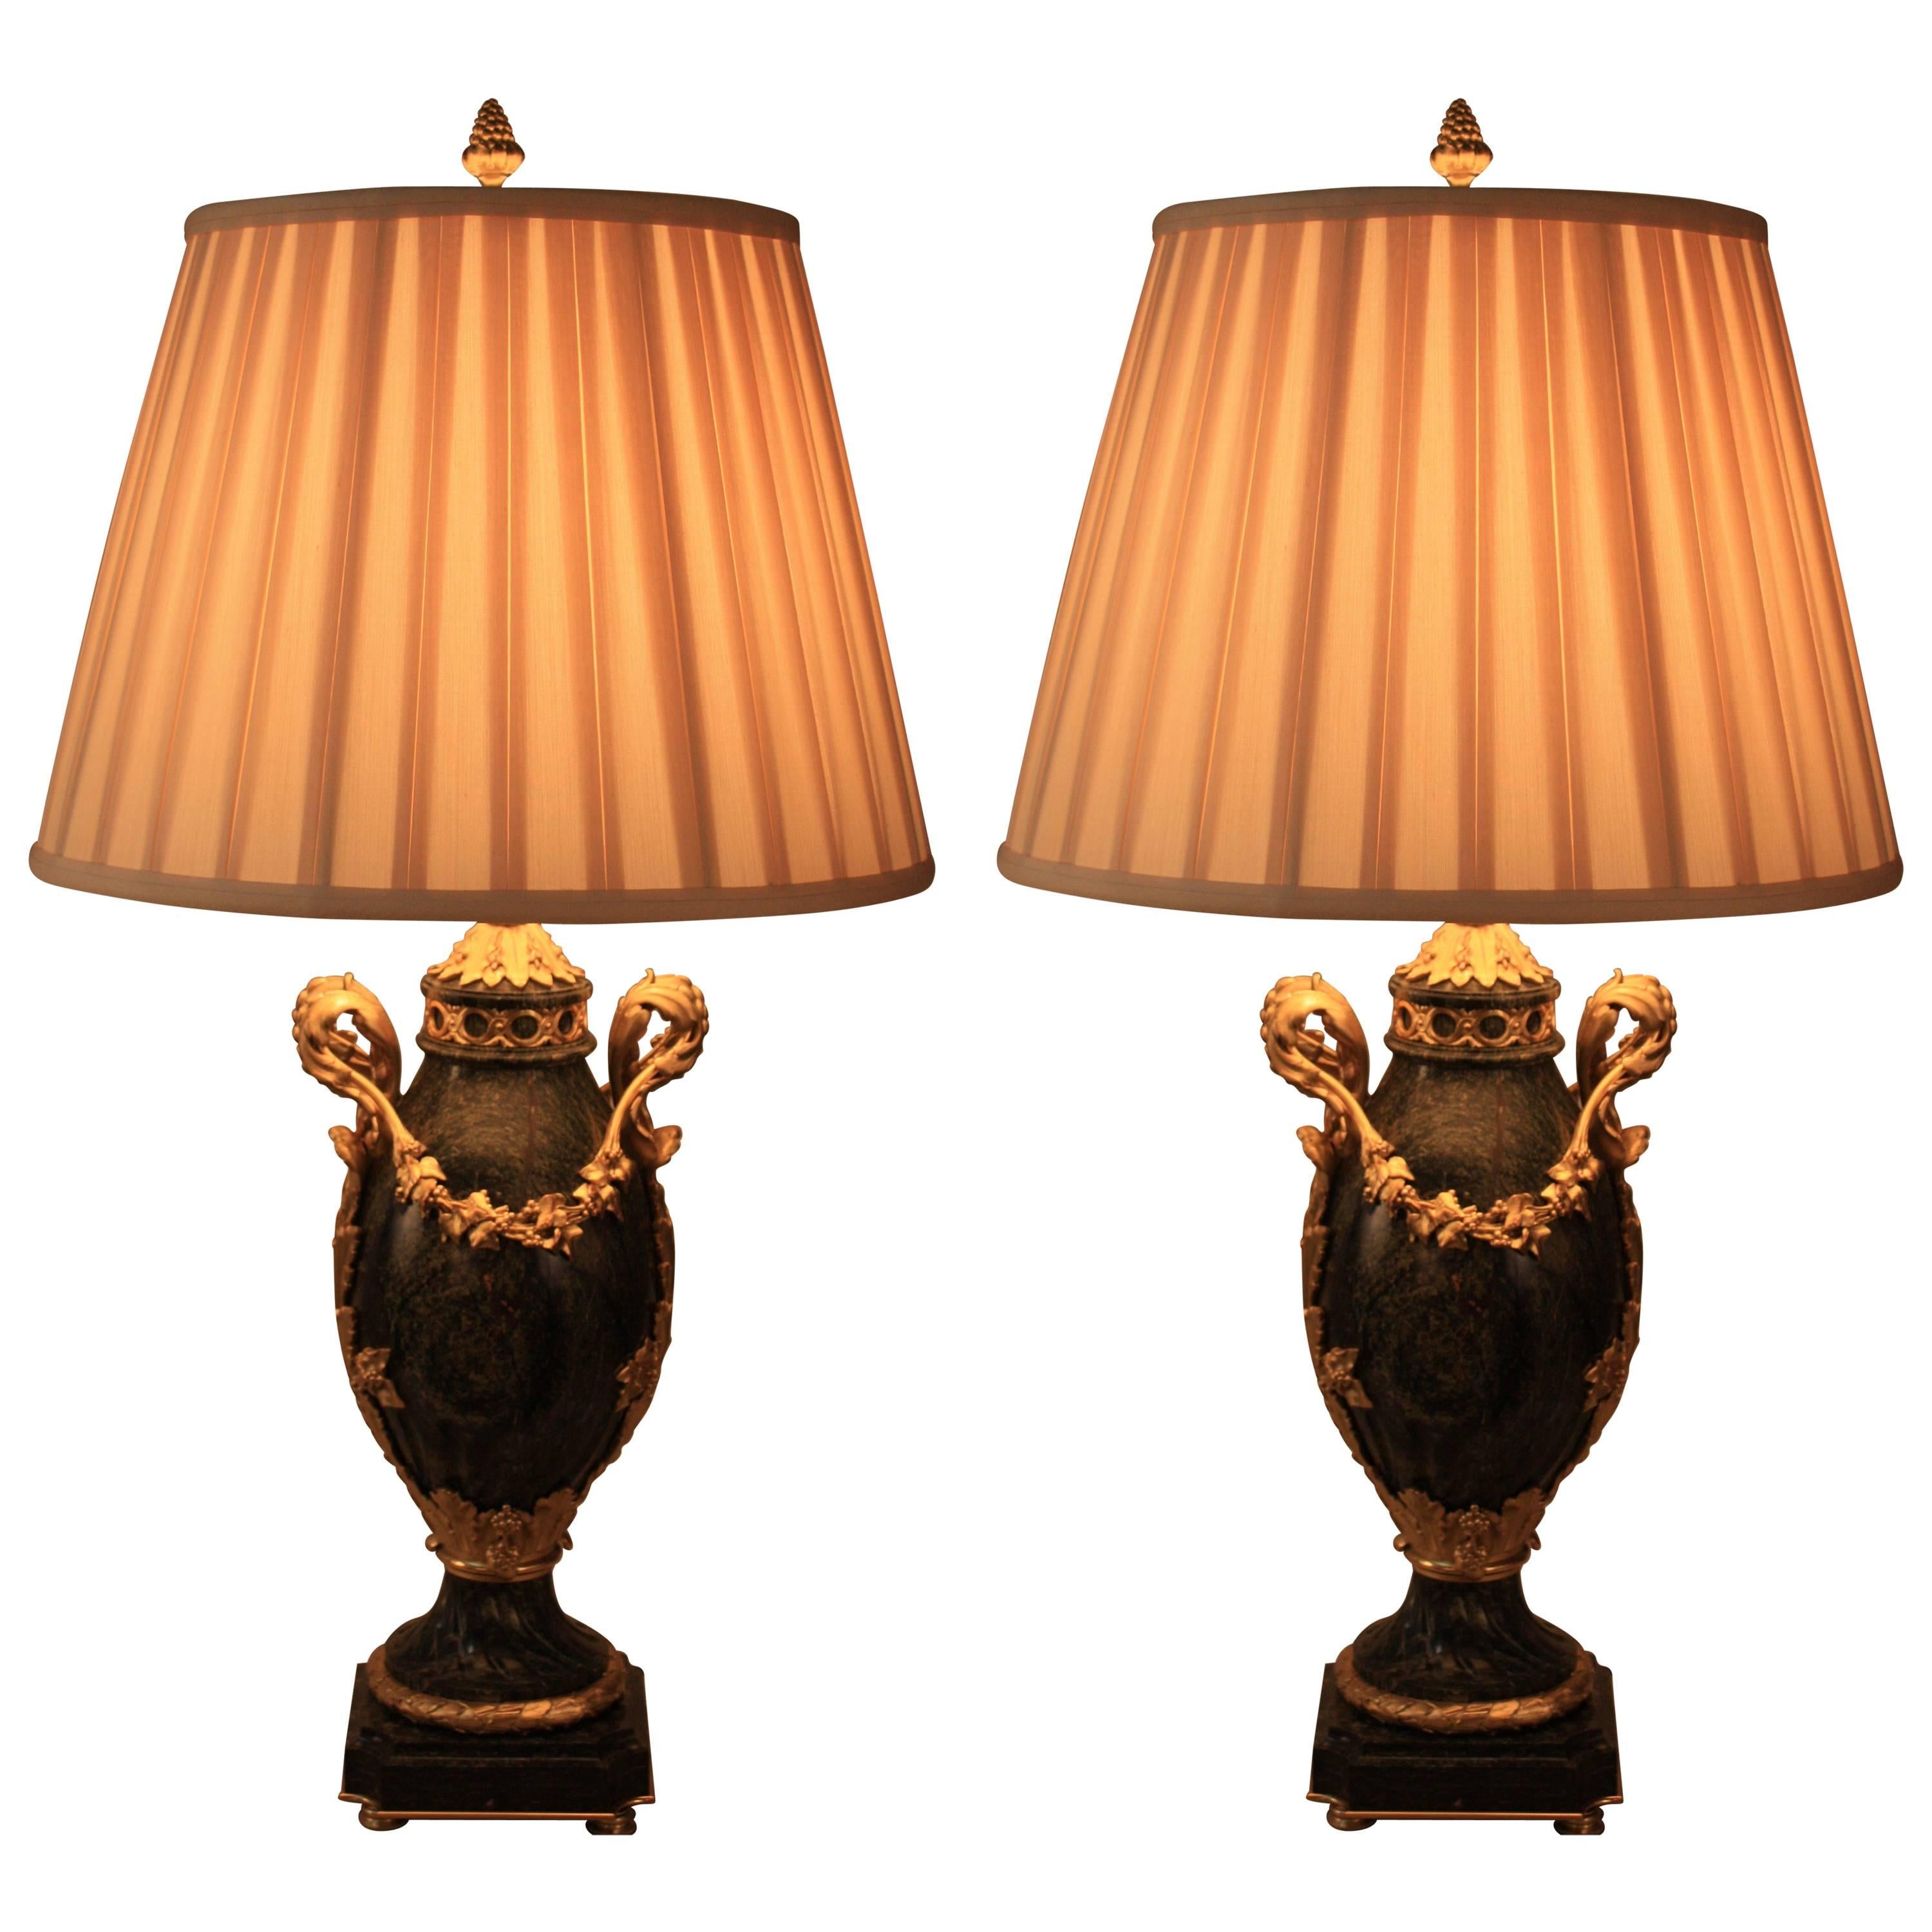 Pair of 19th Century French Gilt Bronze and Marble Urn-Form Table Lamps  